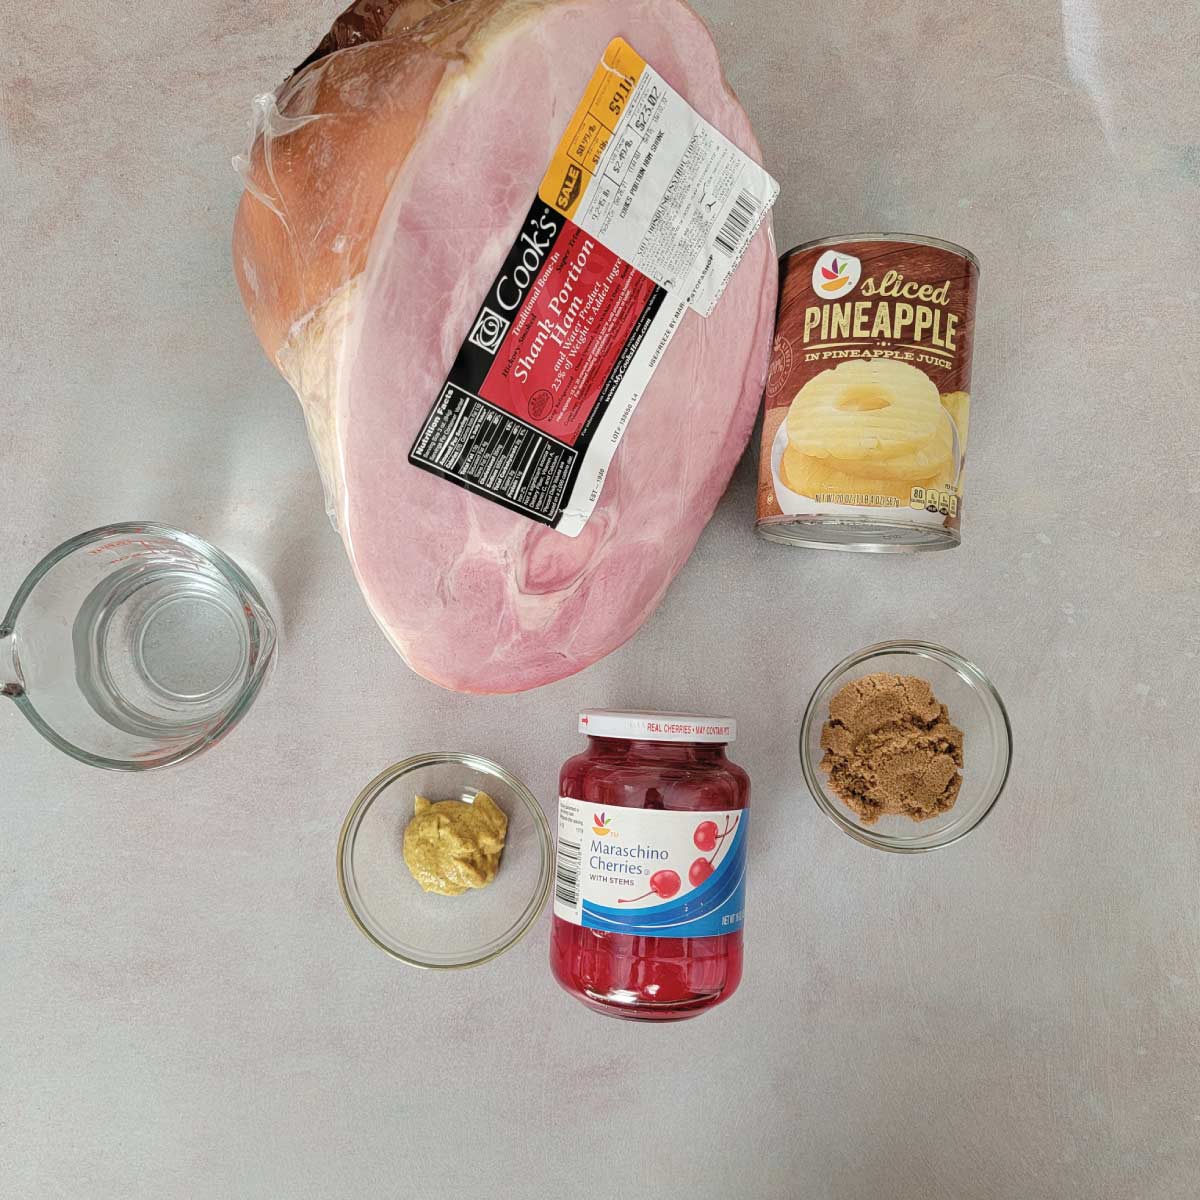 Ingredients for making ham and the ham glaze - water, mustard, cherries, brown sugar, pineapple slices and a shank portion ham.